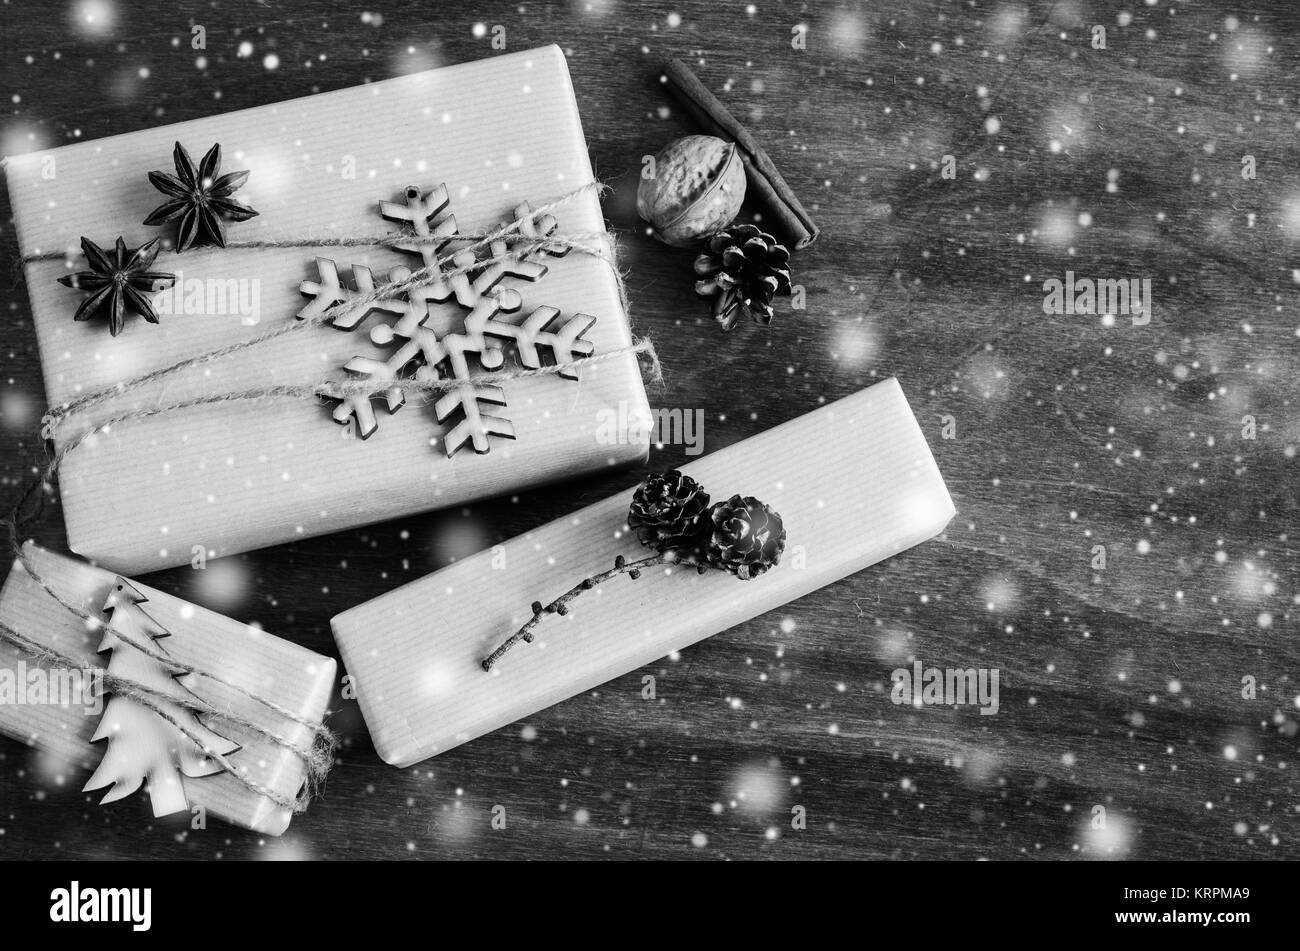 Christmas Kraft Boxes with Gifts Decorated in Rustic Style on Wooden Background. Vintage Image with Drawn Snowfall. Stock Photo